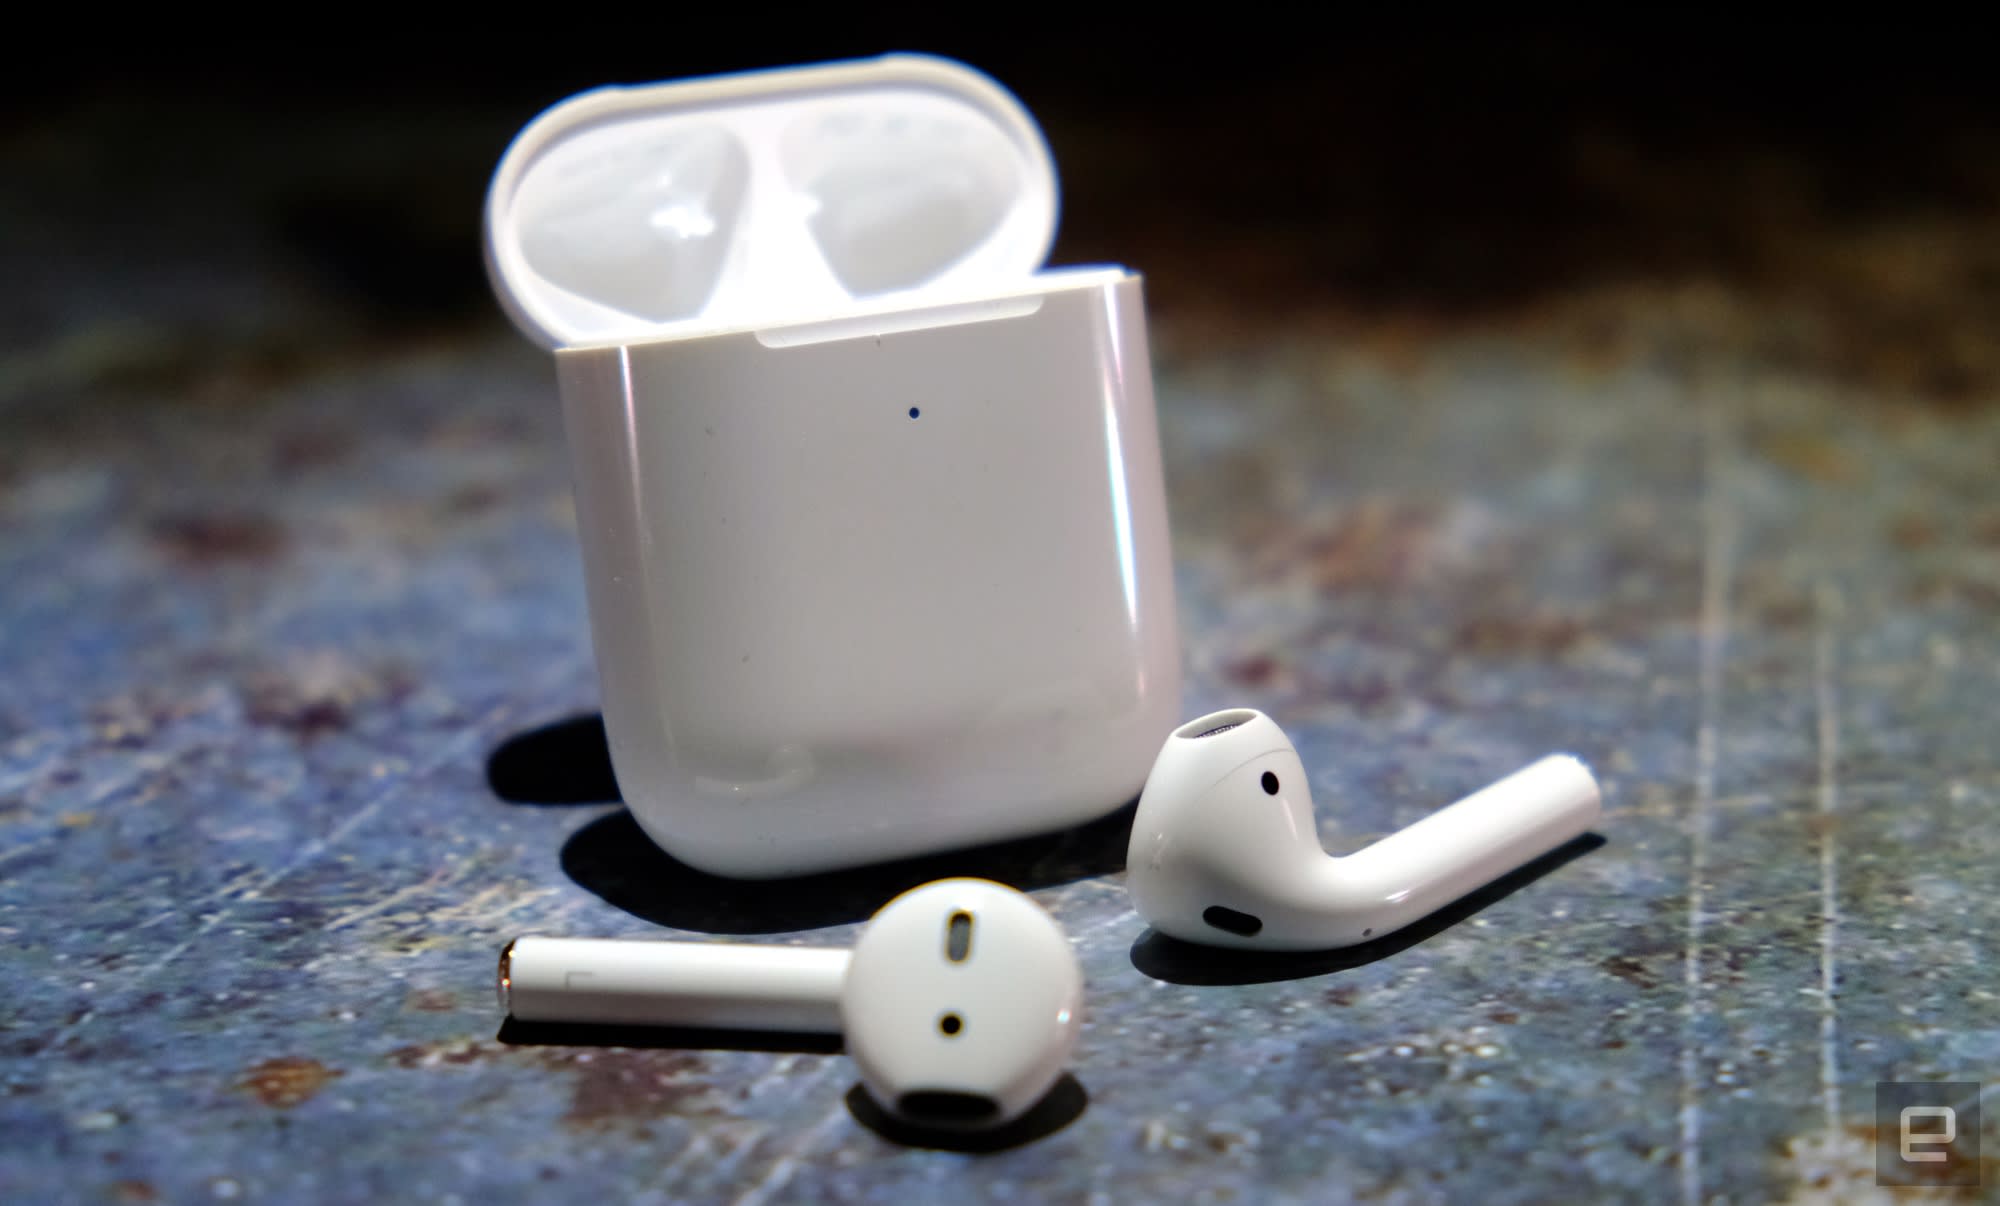 Apple AirPods review (2019): More of the same, but that's OK